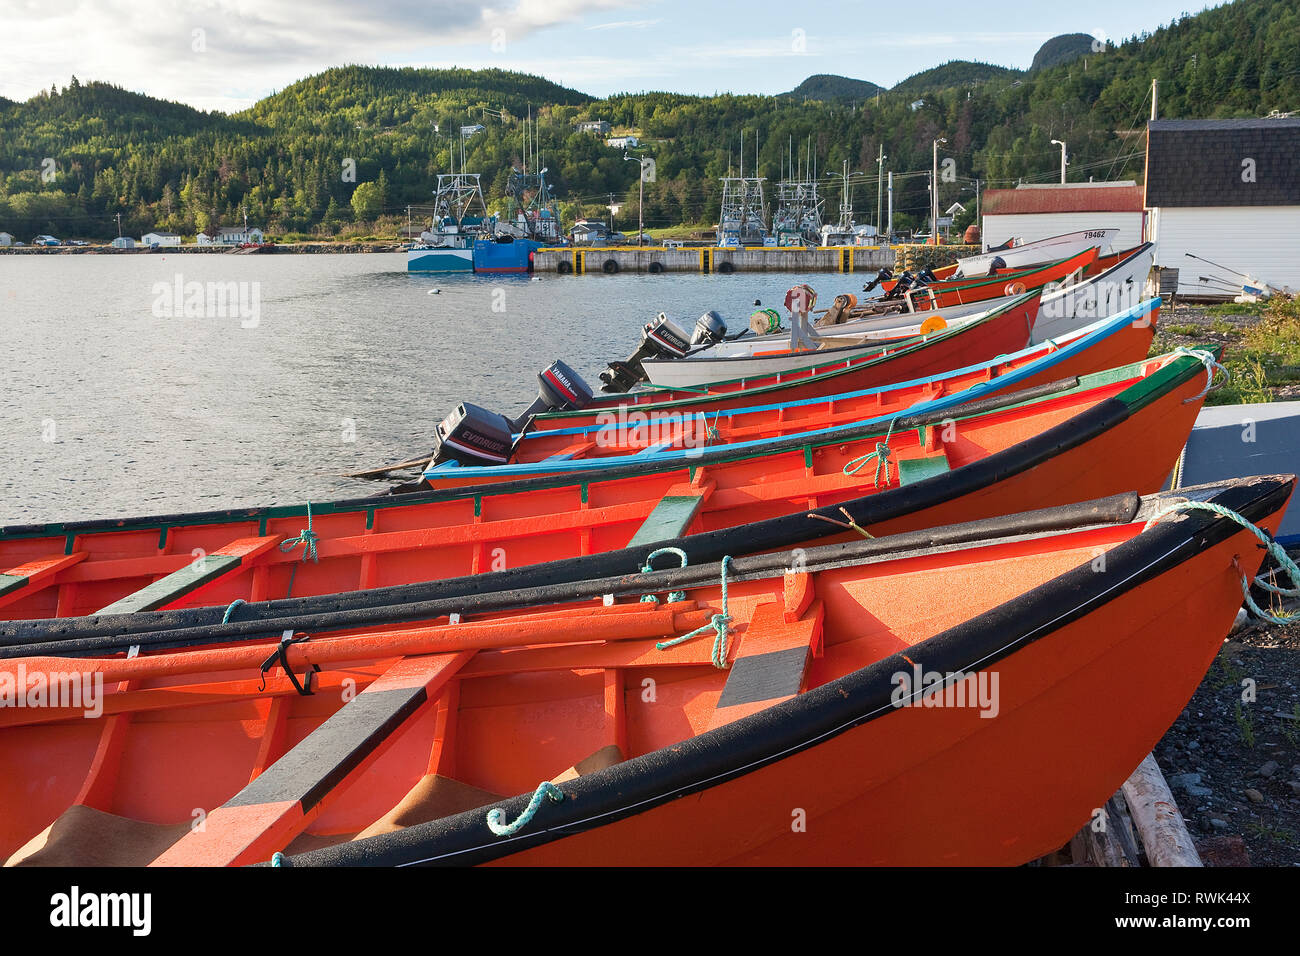 Row of locally built Lark Harbour dories drawn up on a slipway in Frenchman's Cove (Bay of Islands), Newfoundland, Canada Stock Photo